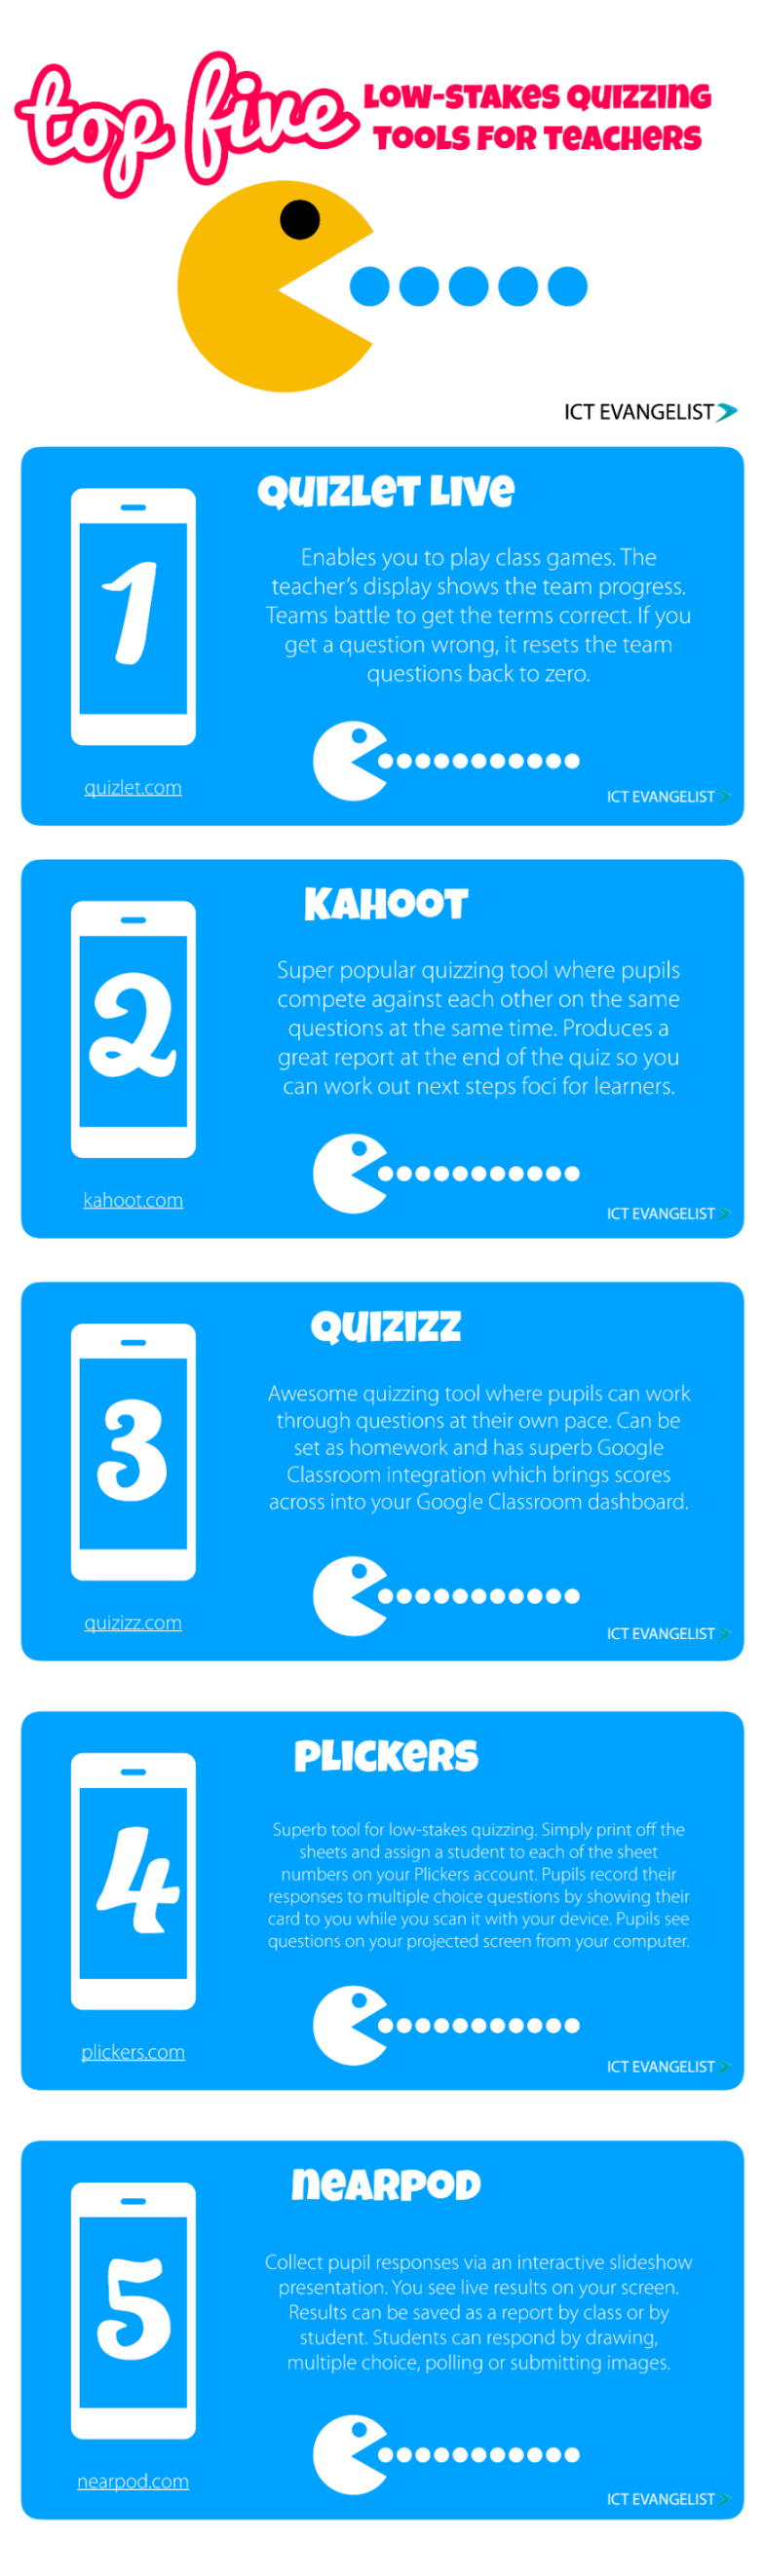 Top 5 Low-Stakes Quizzing Tools For Teachers Infographic